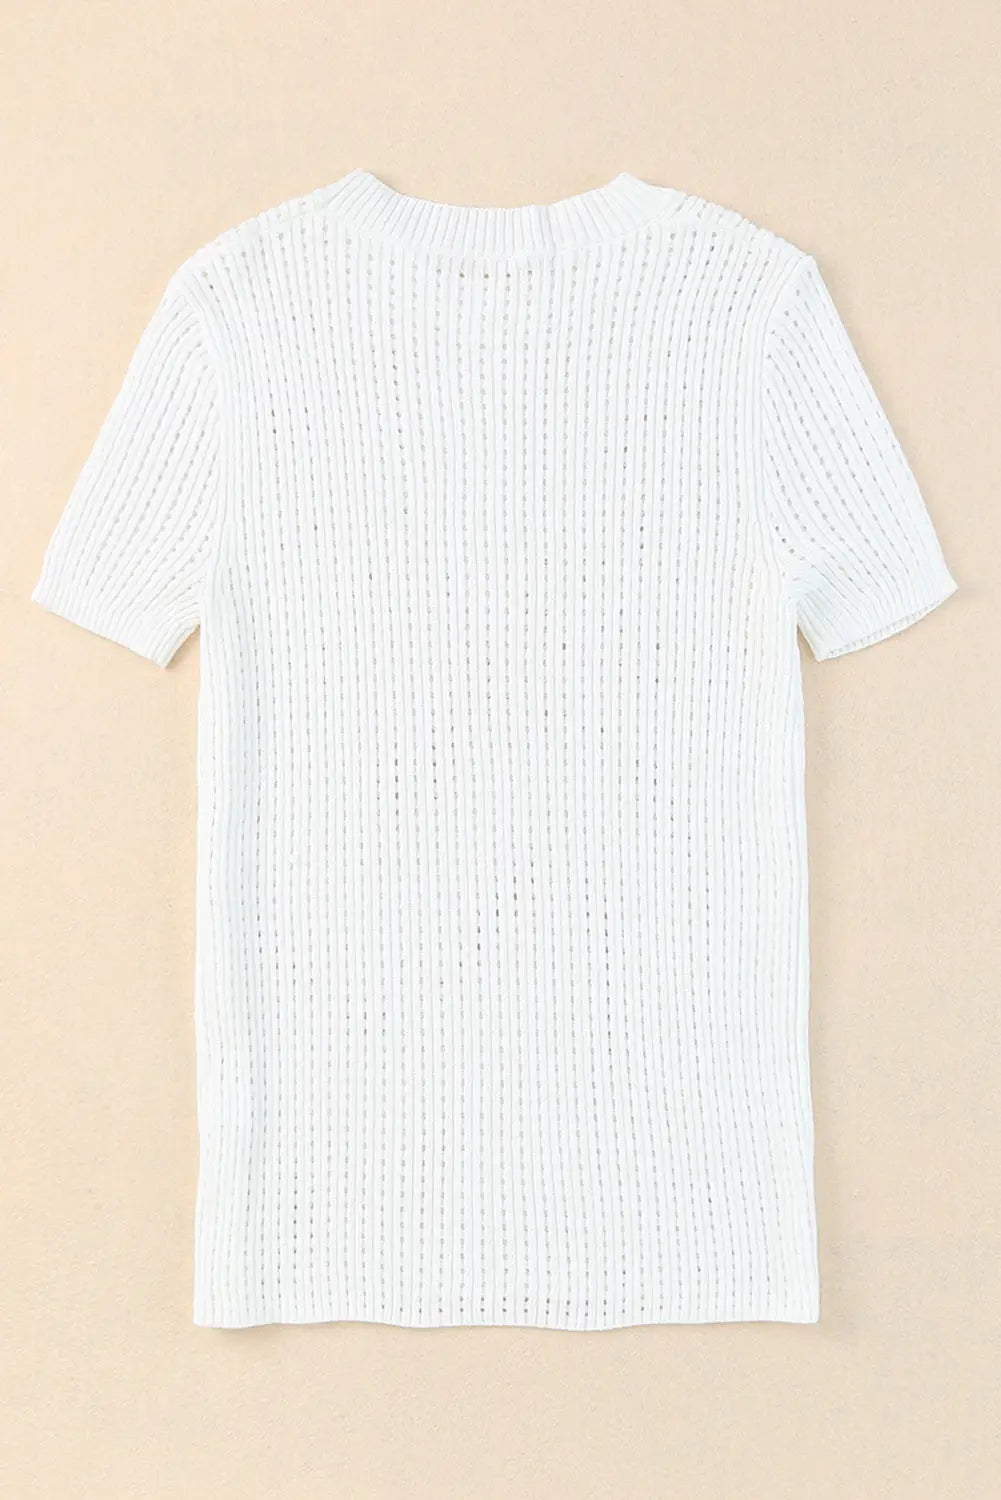 White Hollow-out Knitted Short Sleeve T Shirt-5